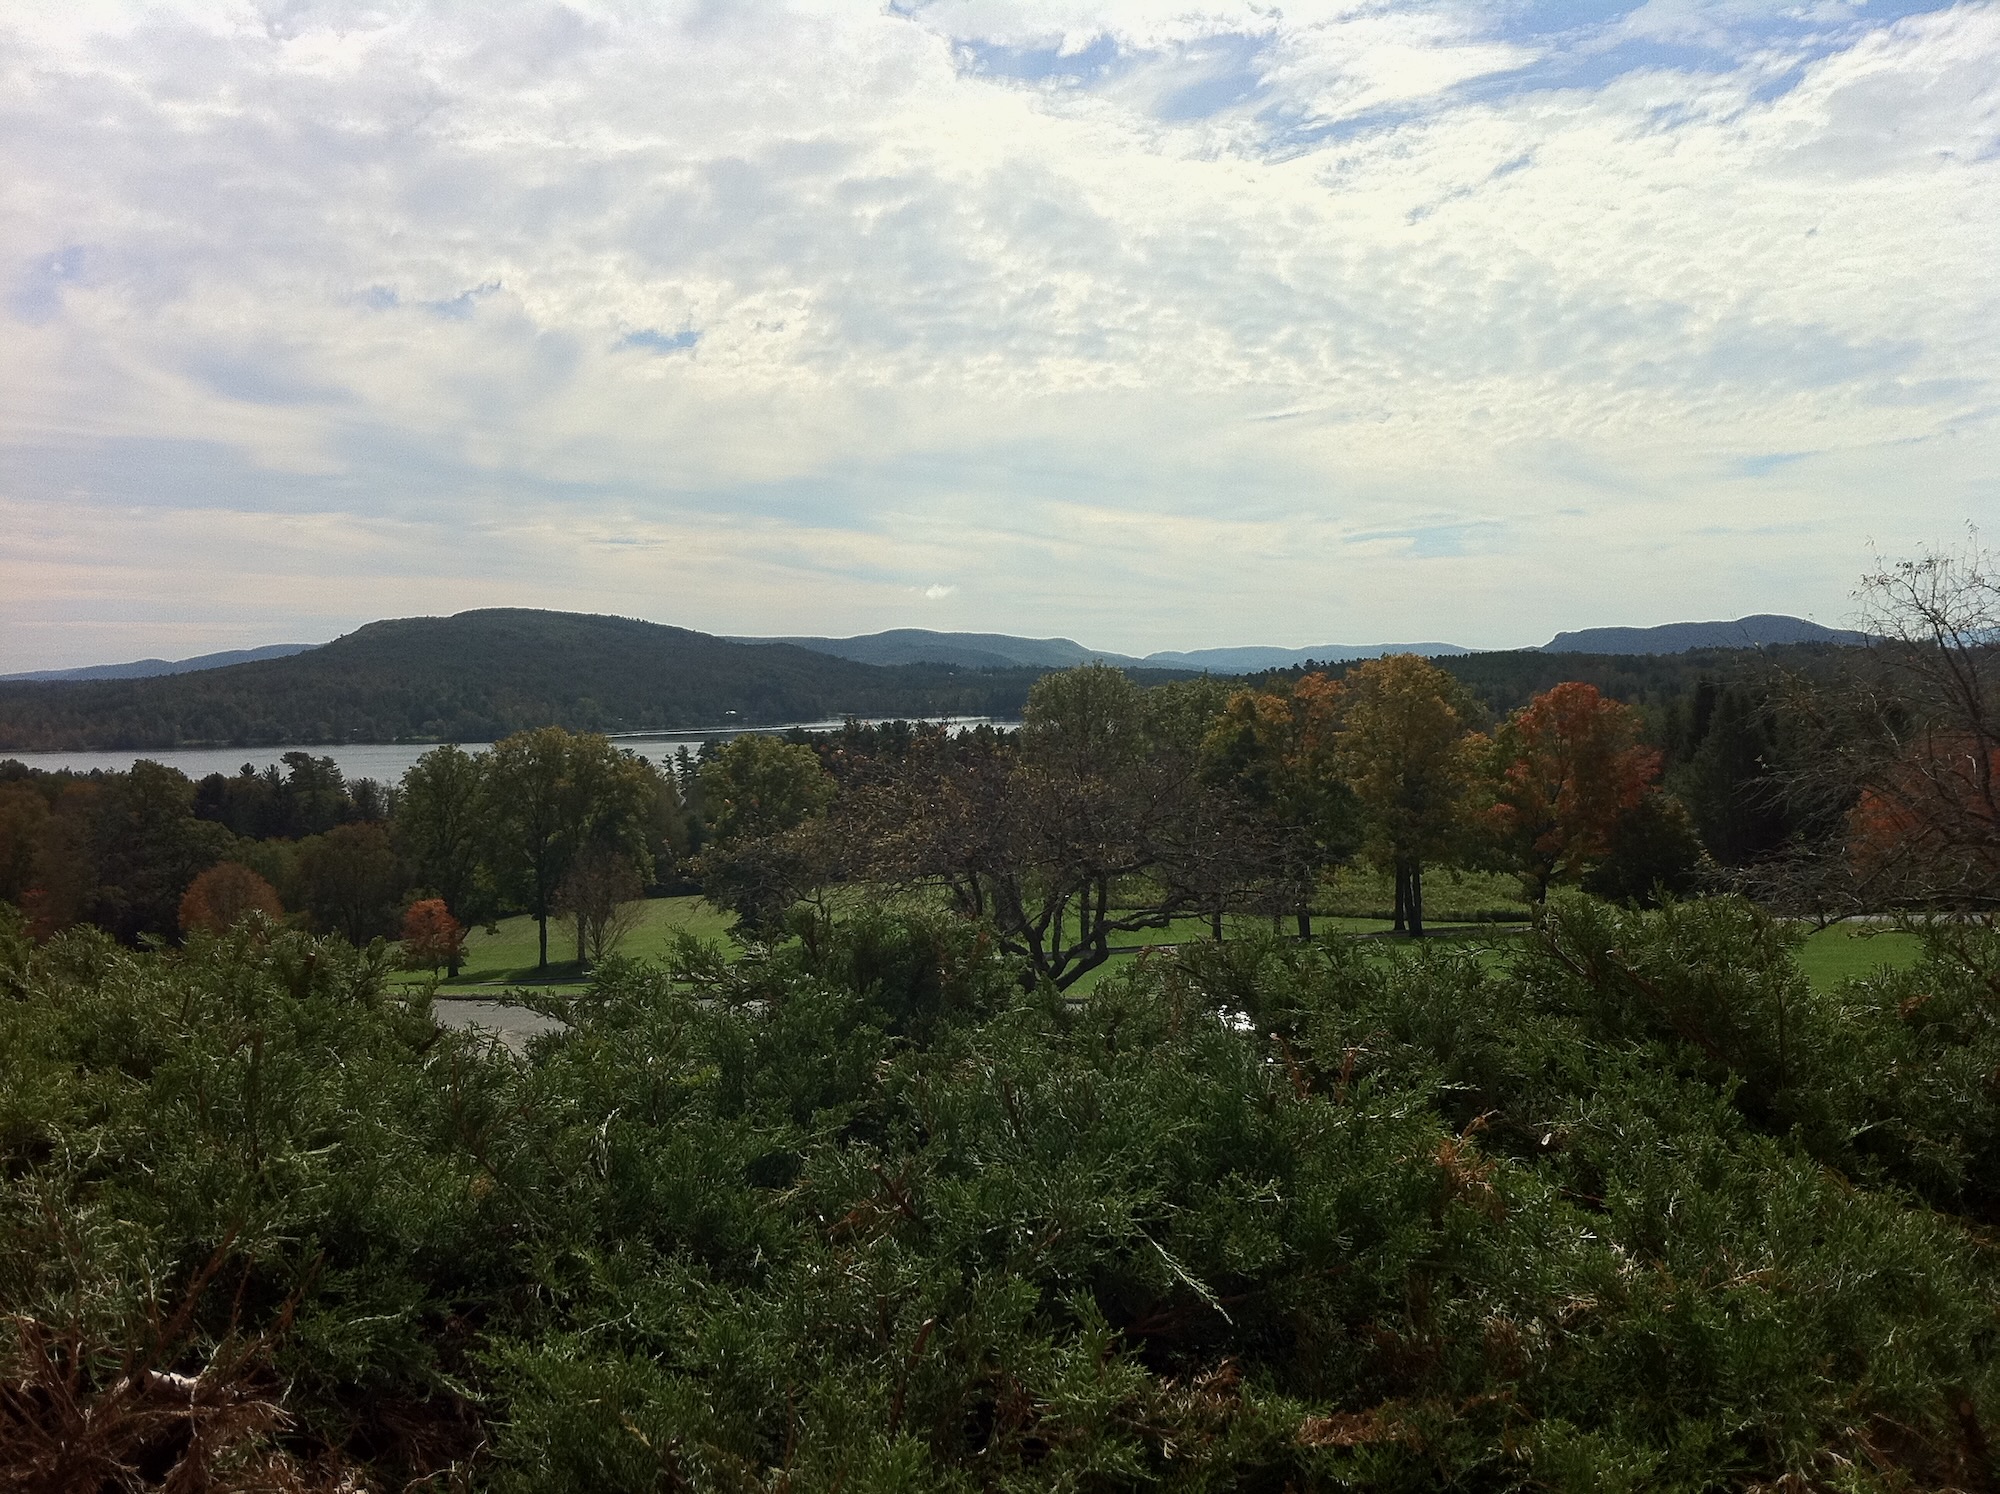 A view of the Berkshire Mountains from Kripalu